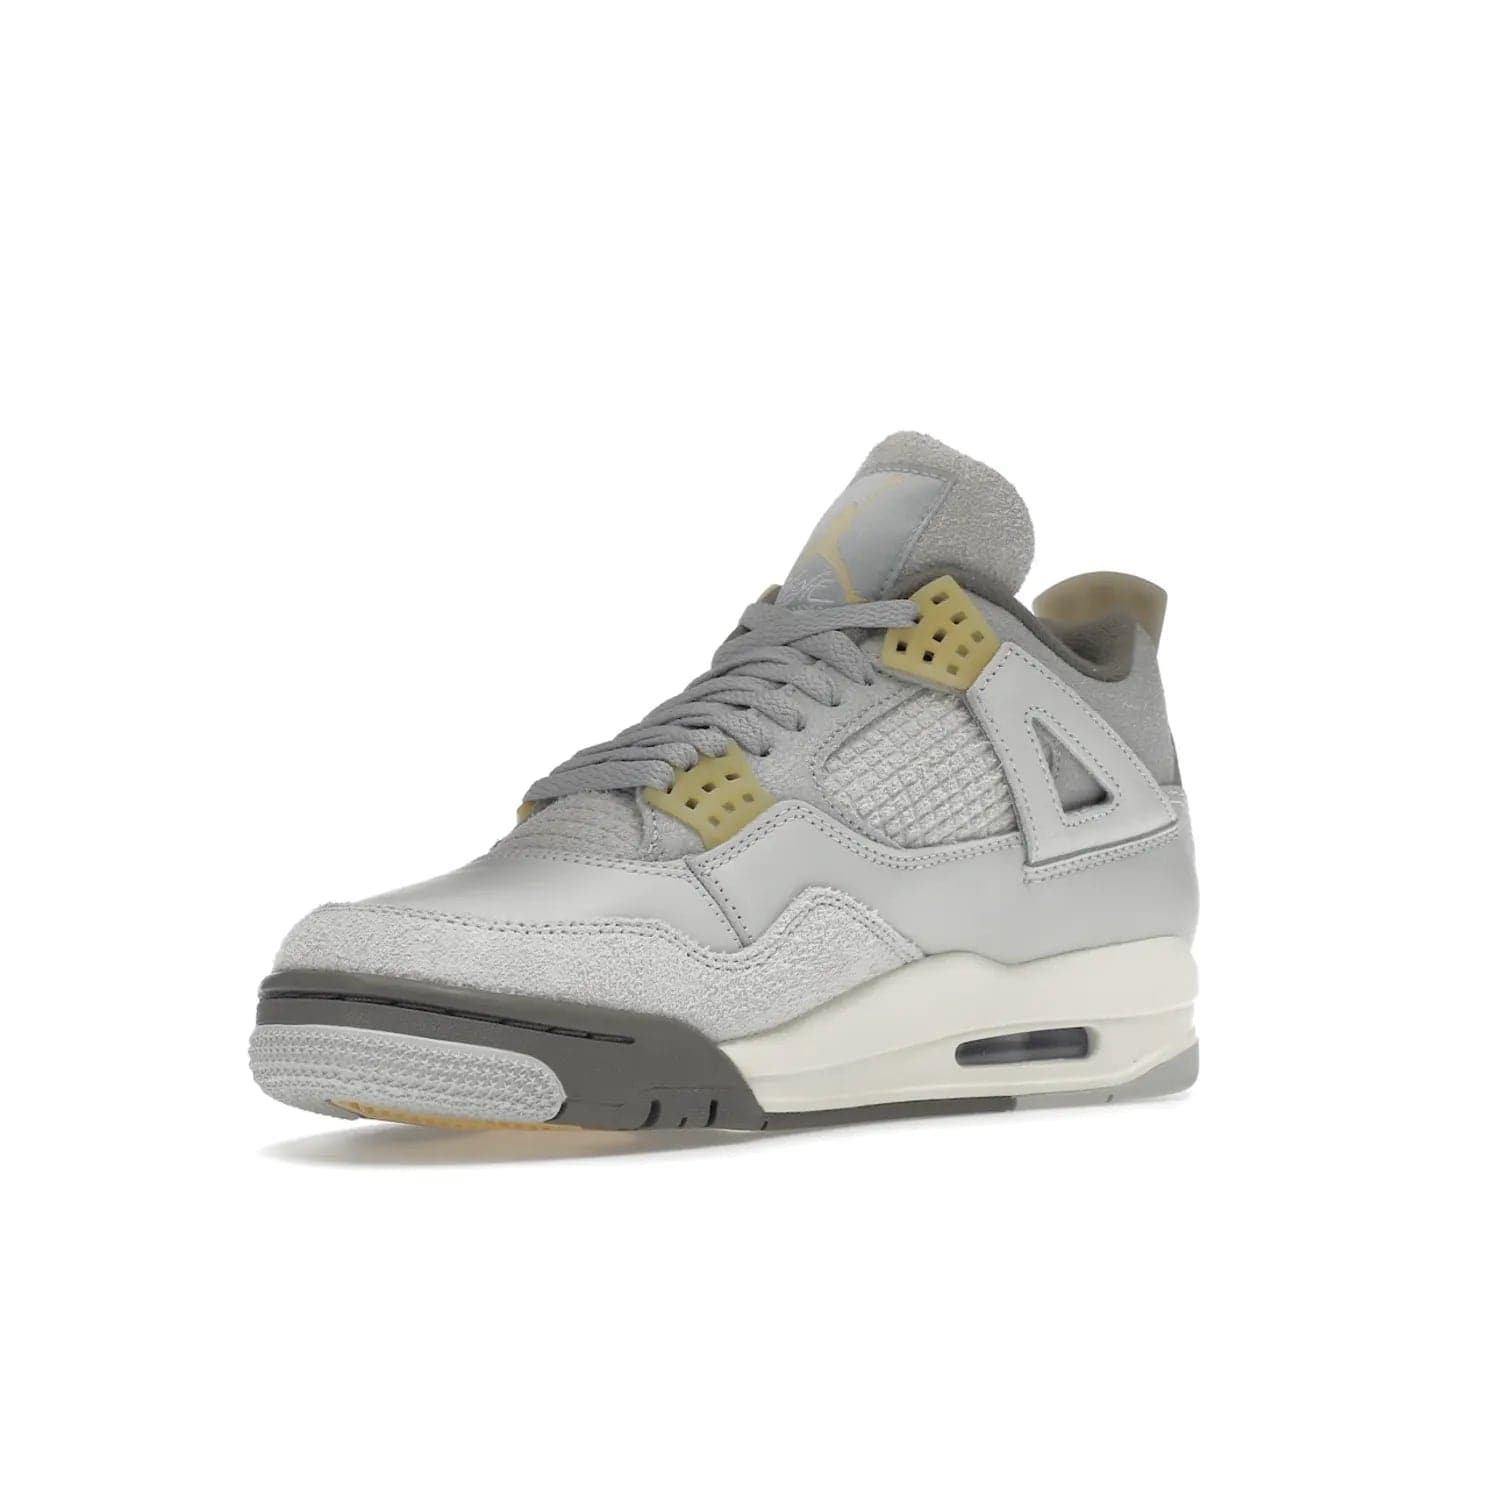 Jordan 4 Retro SE Craft Photon Dust - Image 15 - Only at www.BallersClubKickz.com - Upgrade your shoe collection with the Air Jordan 4 Retro SE Craft Photon Dust. This luxurious sneaker features a combination of suede and leather with unique grey tones like Photon Dust, Pale Vanilla, Off White, Grey Fog, Flat Pewter, and Sail. Available February 11, 2023.